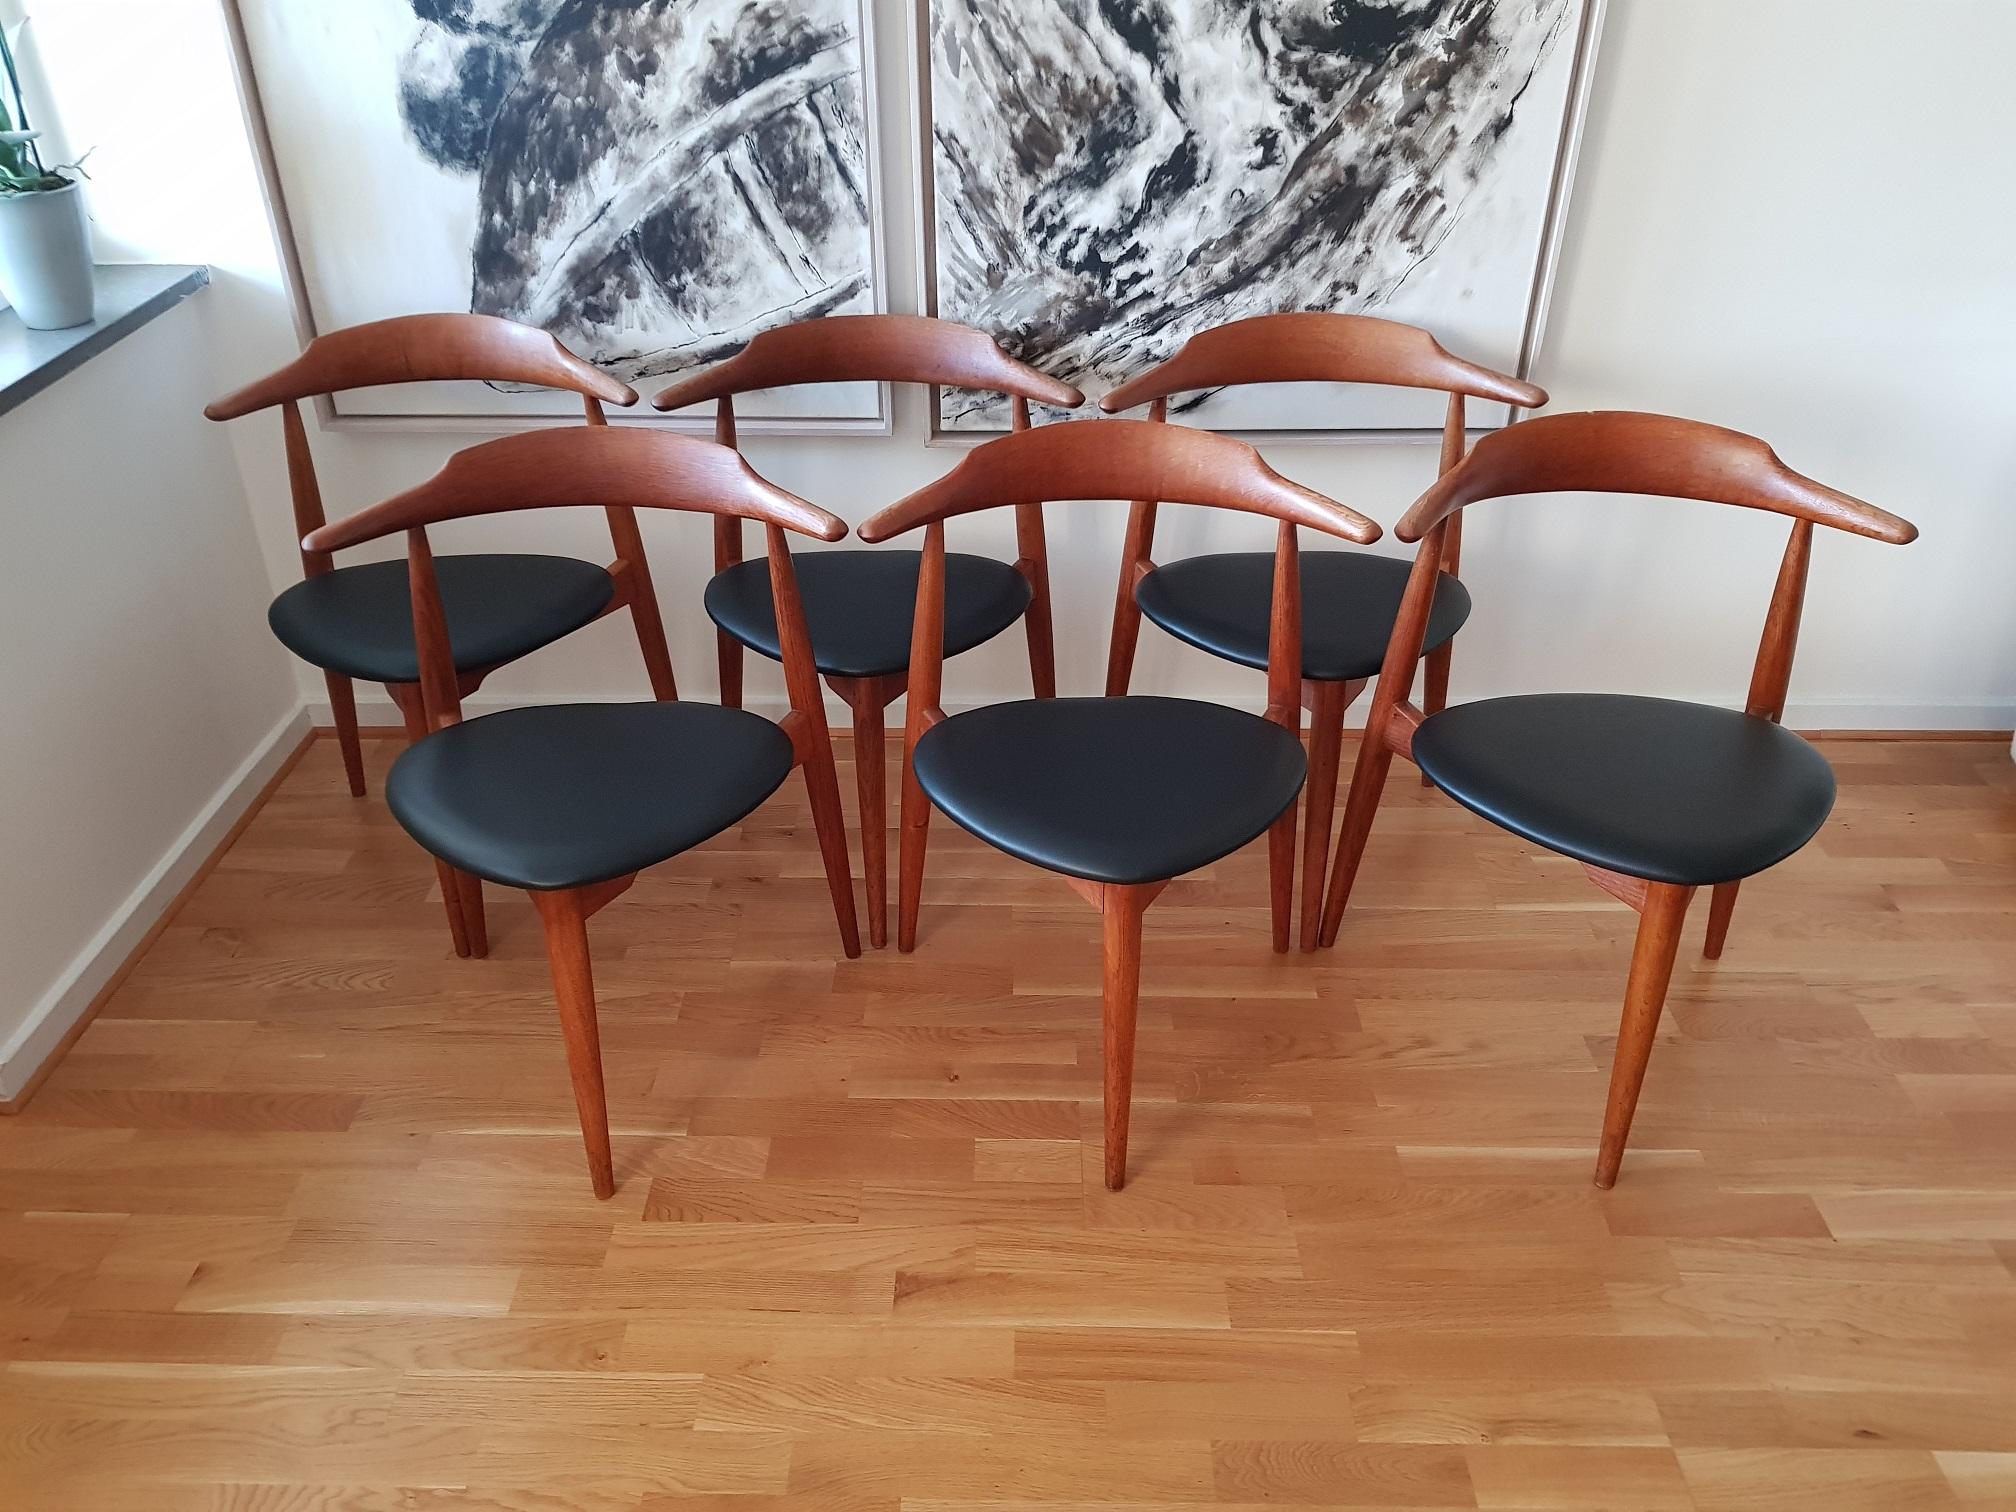 6 vintage Heart chairs in oiled teak/oak and black leather. Newly upholstered in black leather. The chairs were produced in the 1960s and are just stunning. Hans J. Wegner is one of the most famous Scandinavian furniture designers and he made iconic